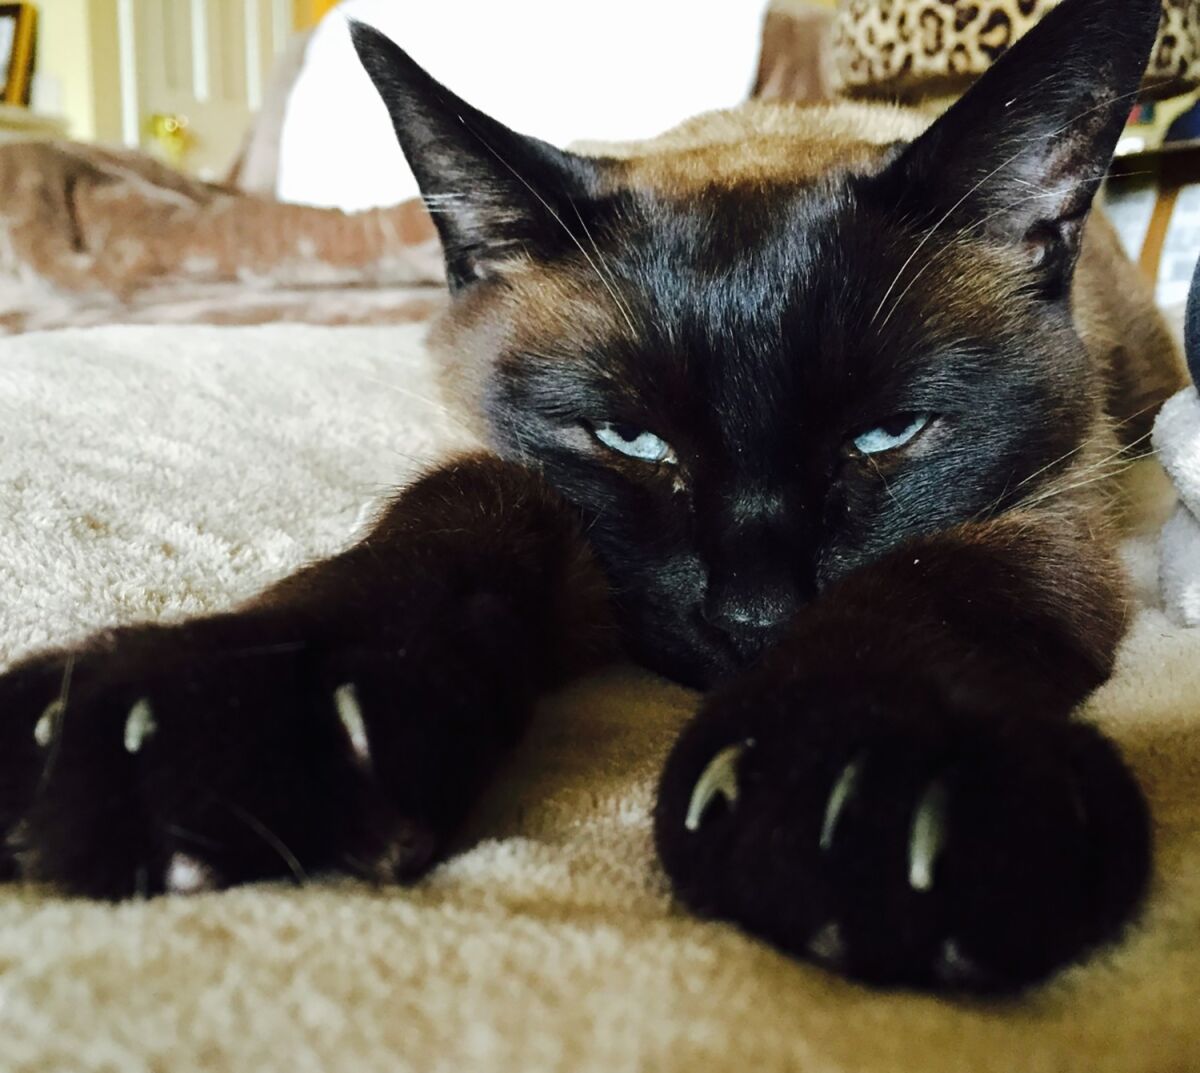 Claws are visible in the paws of a reclining cat.